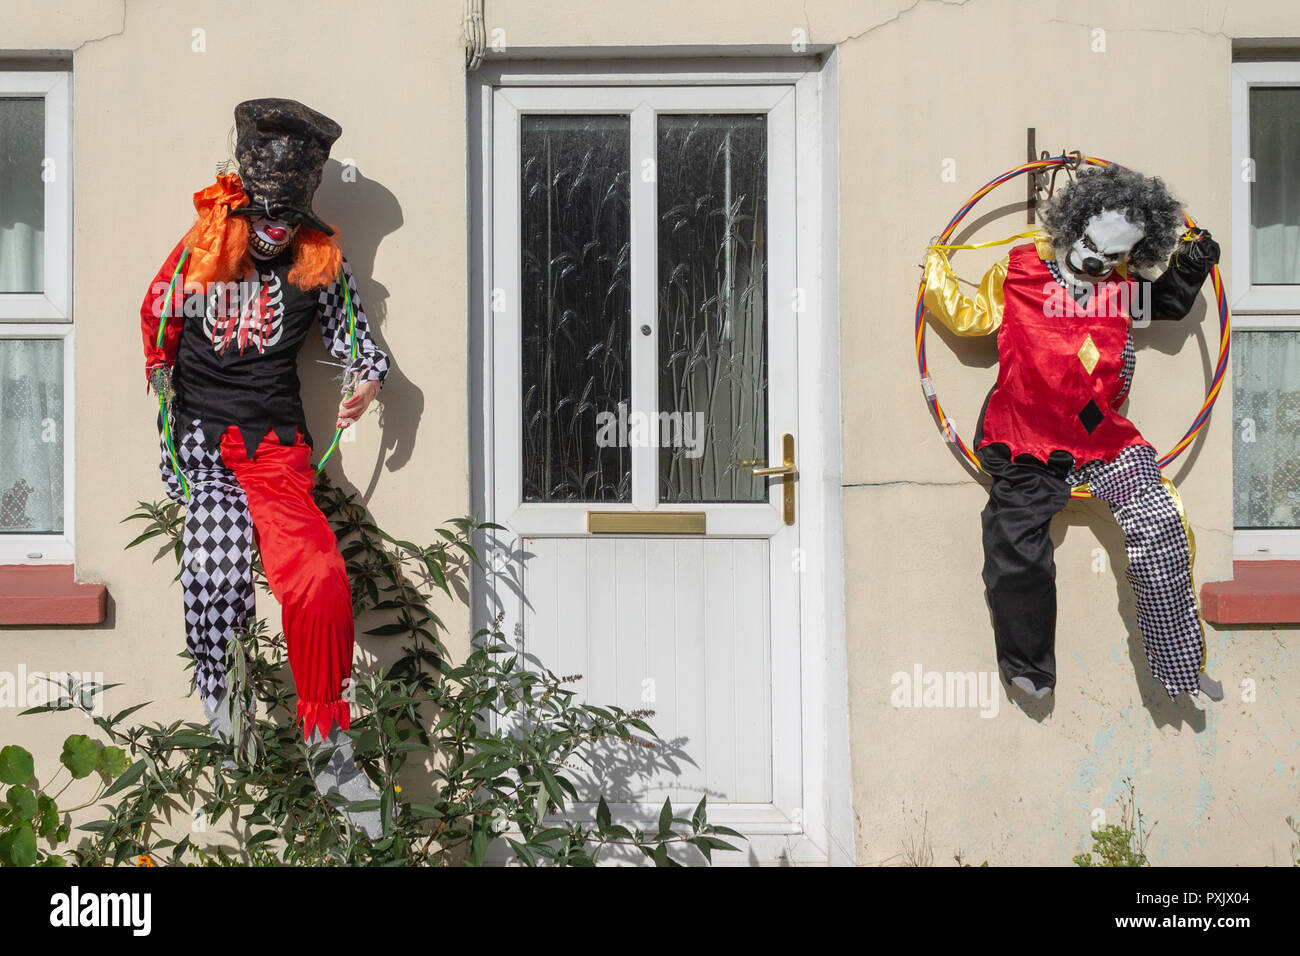 Leap, West Cork, Ireland, October 23rd 2018. Another fine day in West Cork with temperatures reaching 17 Deg. In Leap village scarecrows and ghouls started to appear on the roadside and front gardens as part of the Leap Scarecrow Festival, aiming to make Leap the spookiest place in Ireland. The festival runs from 20th October to 5th November. Credit: aphperspective/Alamy Live News Stock Photo